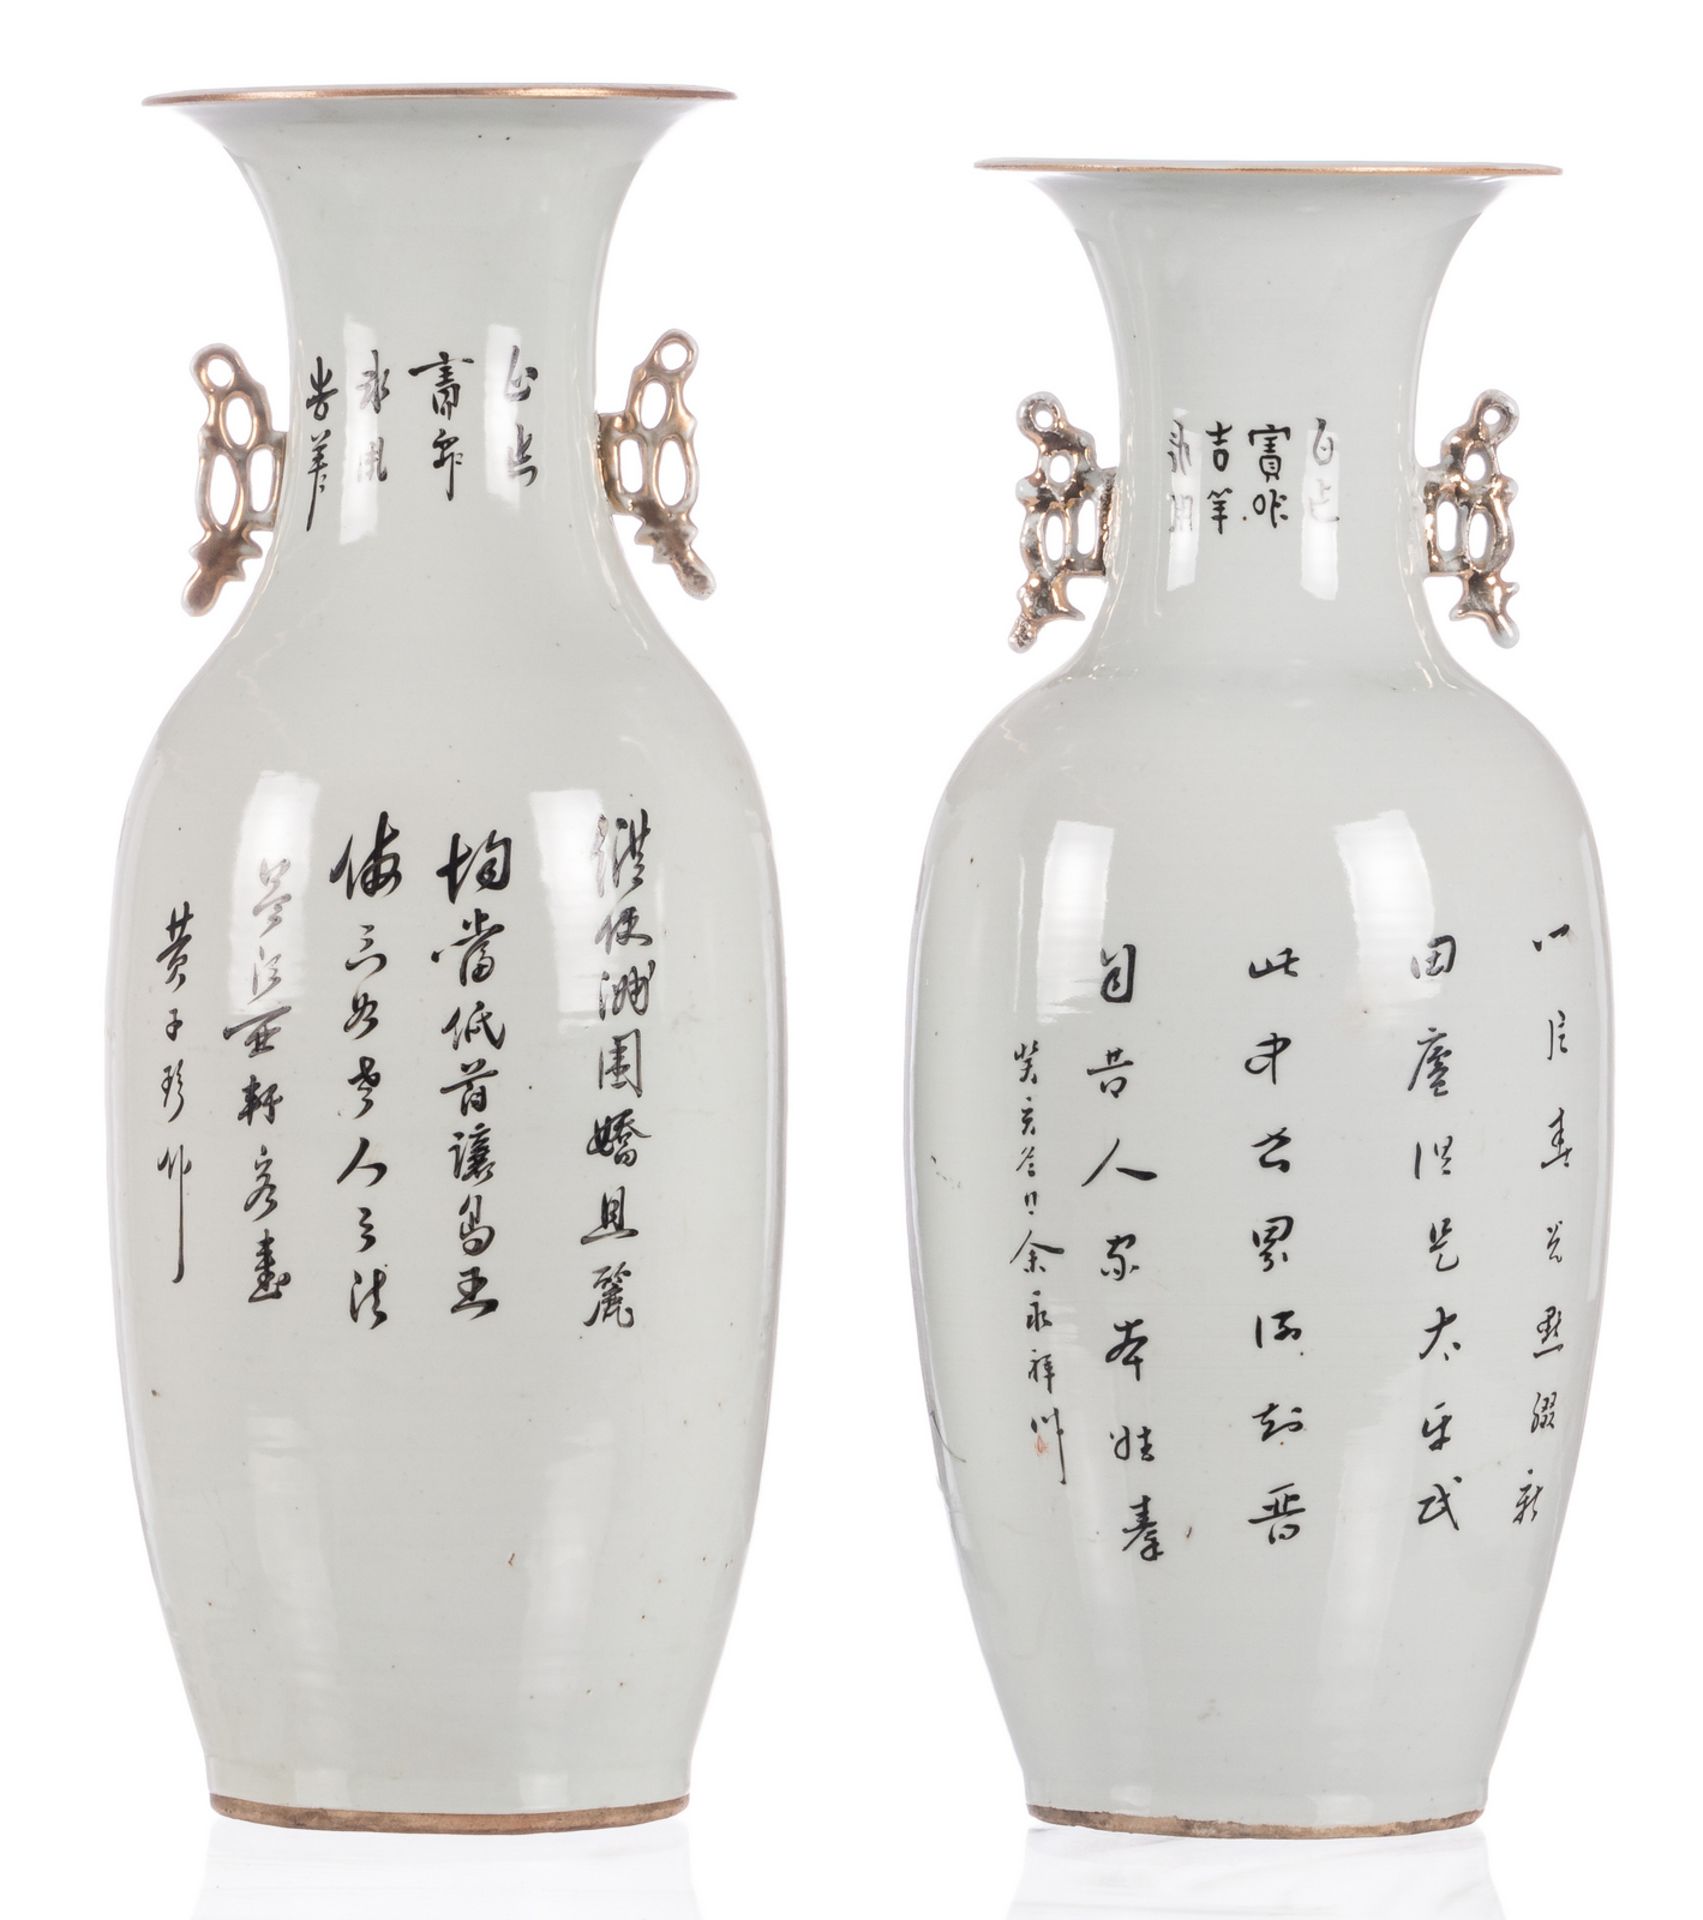 Two Chinese famille rose vases, one vase decorated with an animated scene and calligraphic texts and - Image 2 of 6